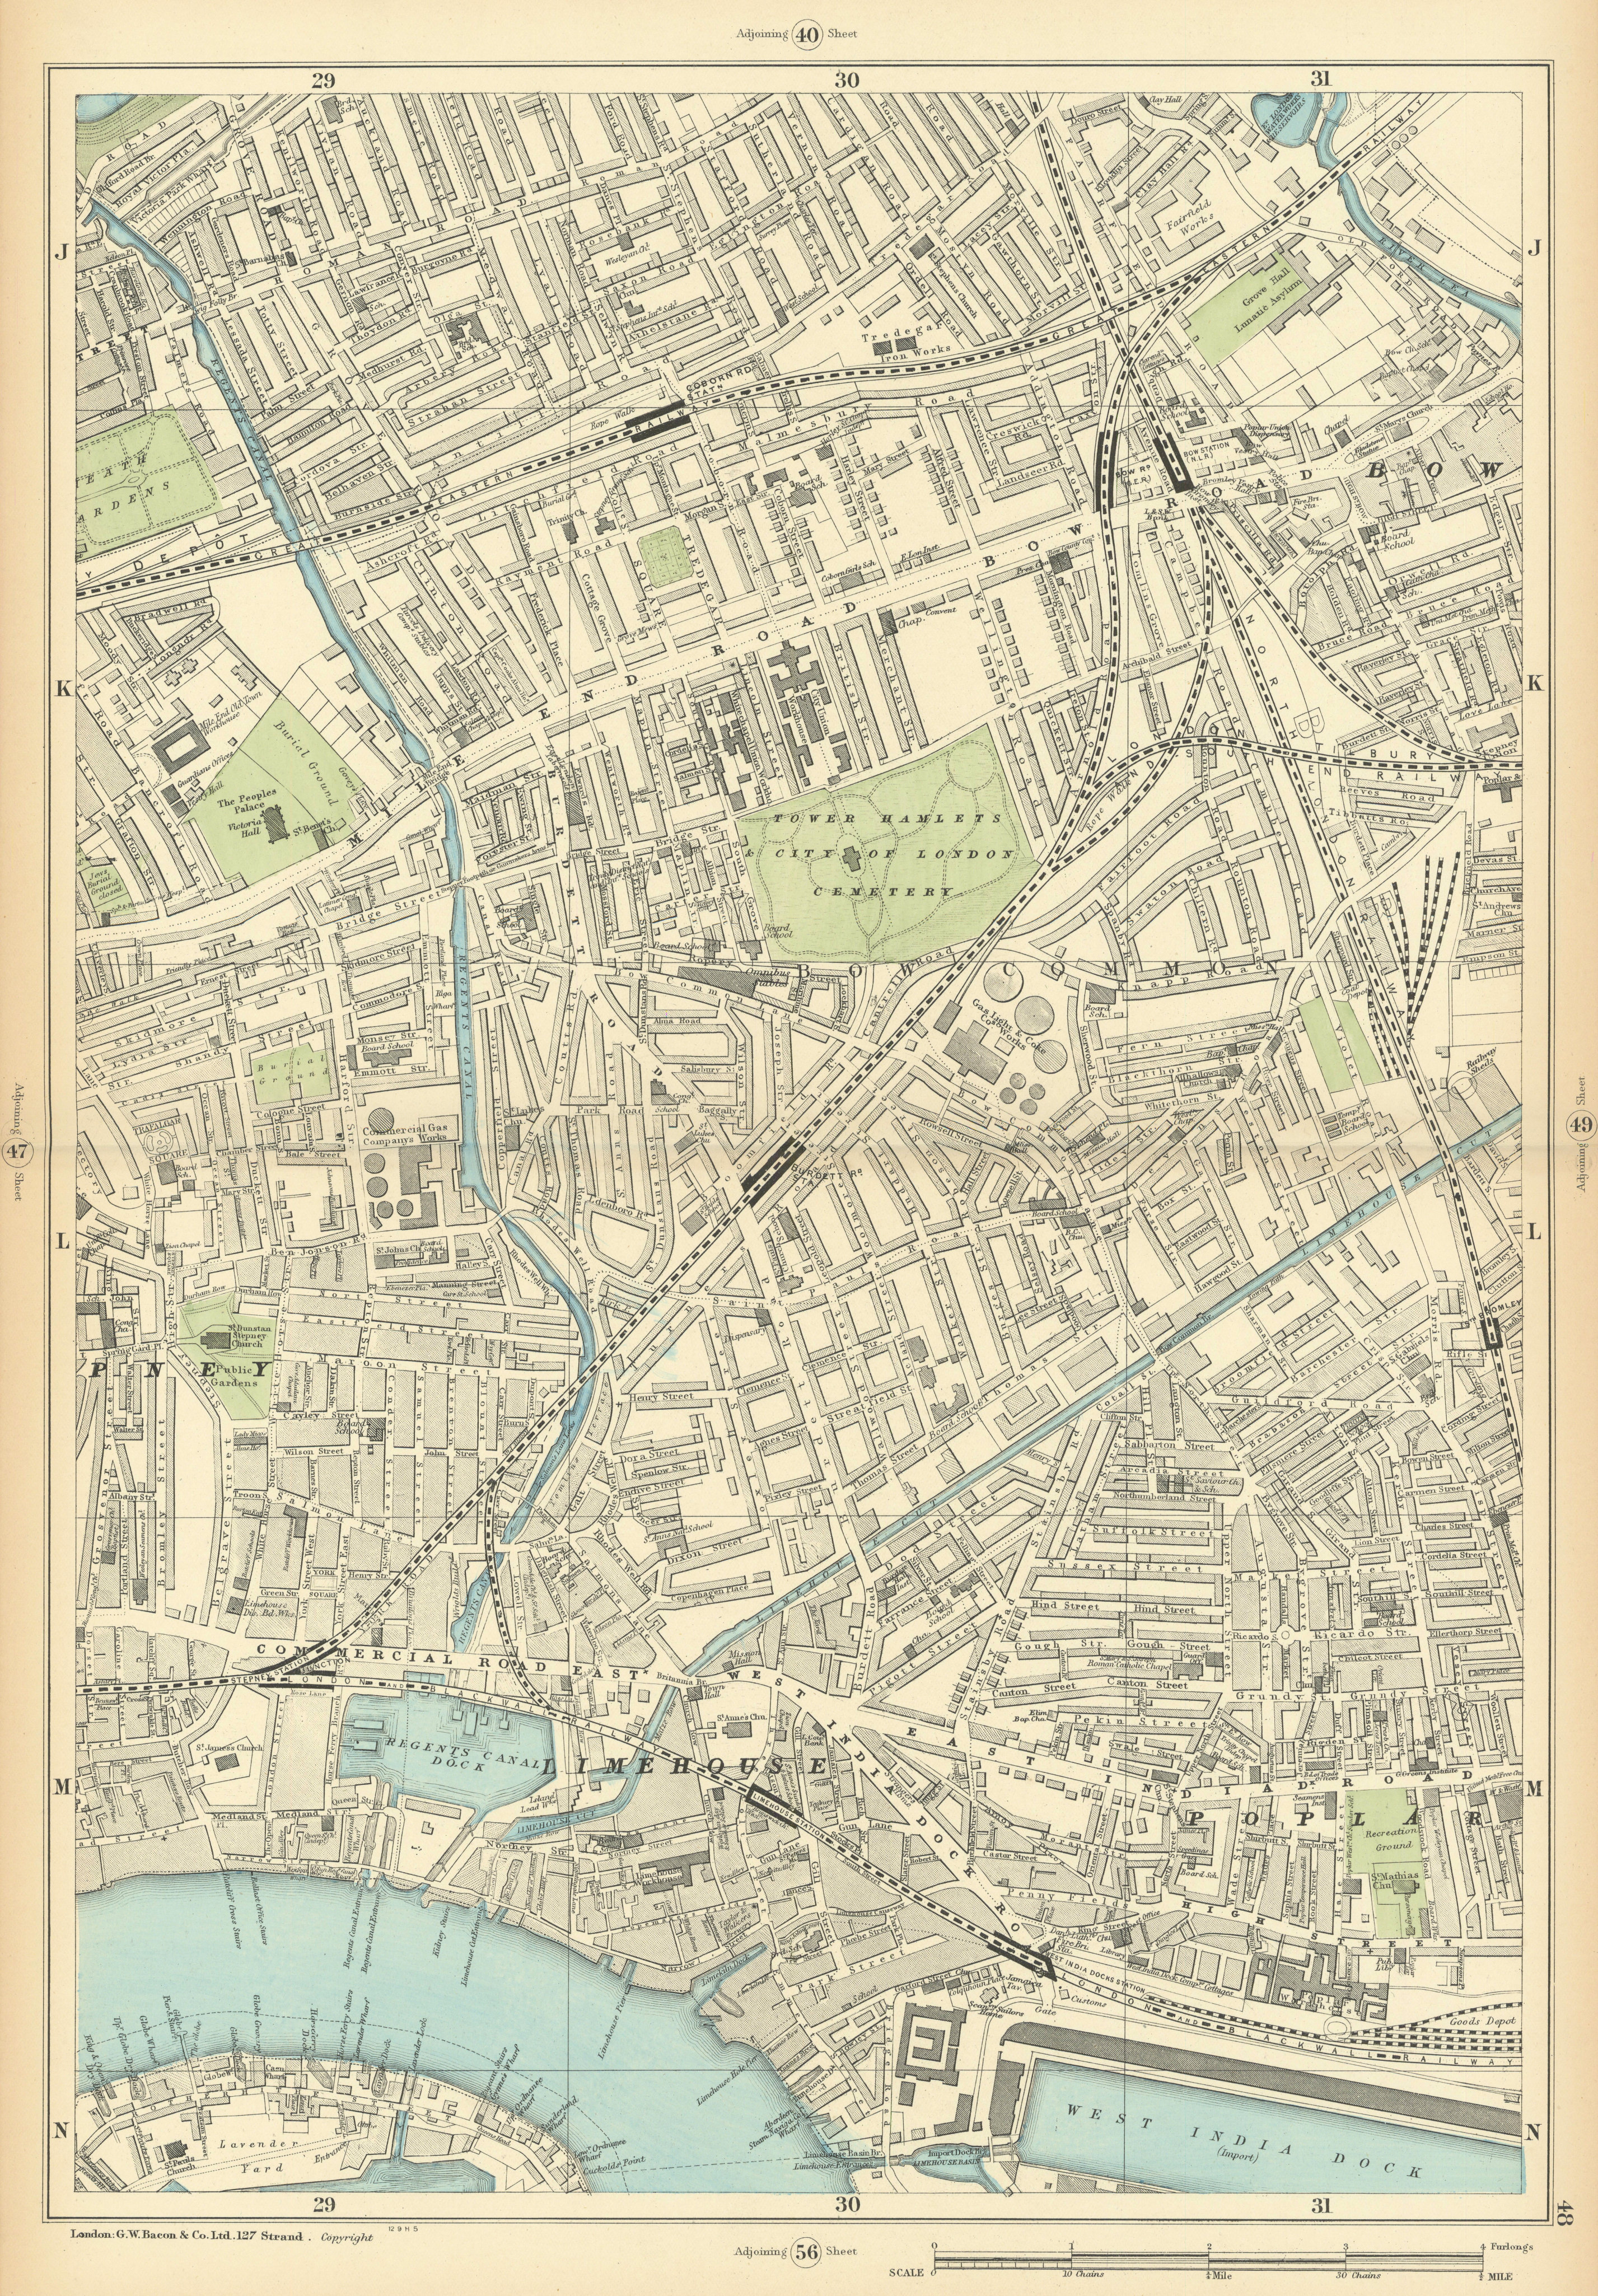 Associate Product TOWER HAMLETS Bow Poplar Stepney Limehouse Mile End Bromley 1900 old map